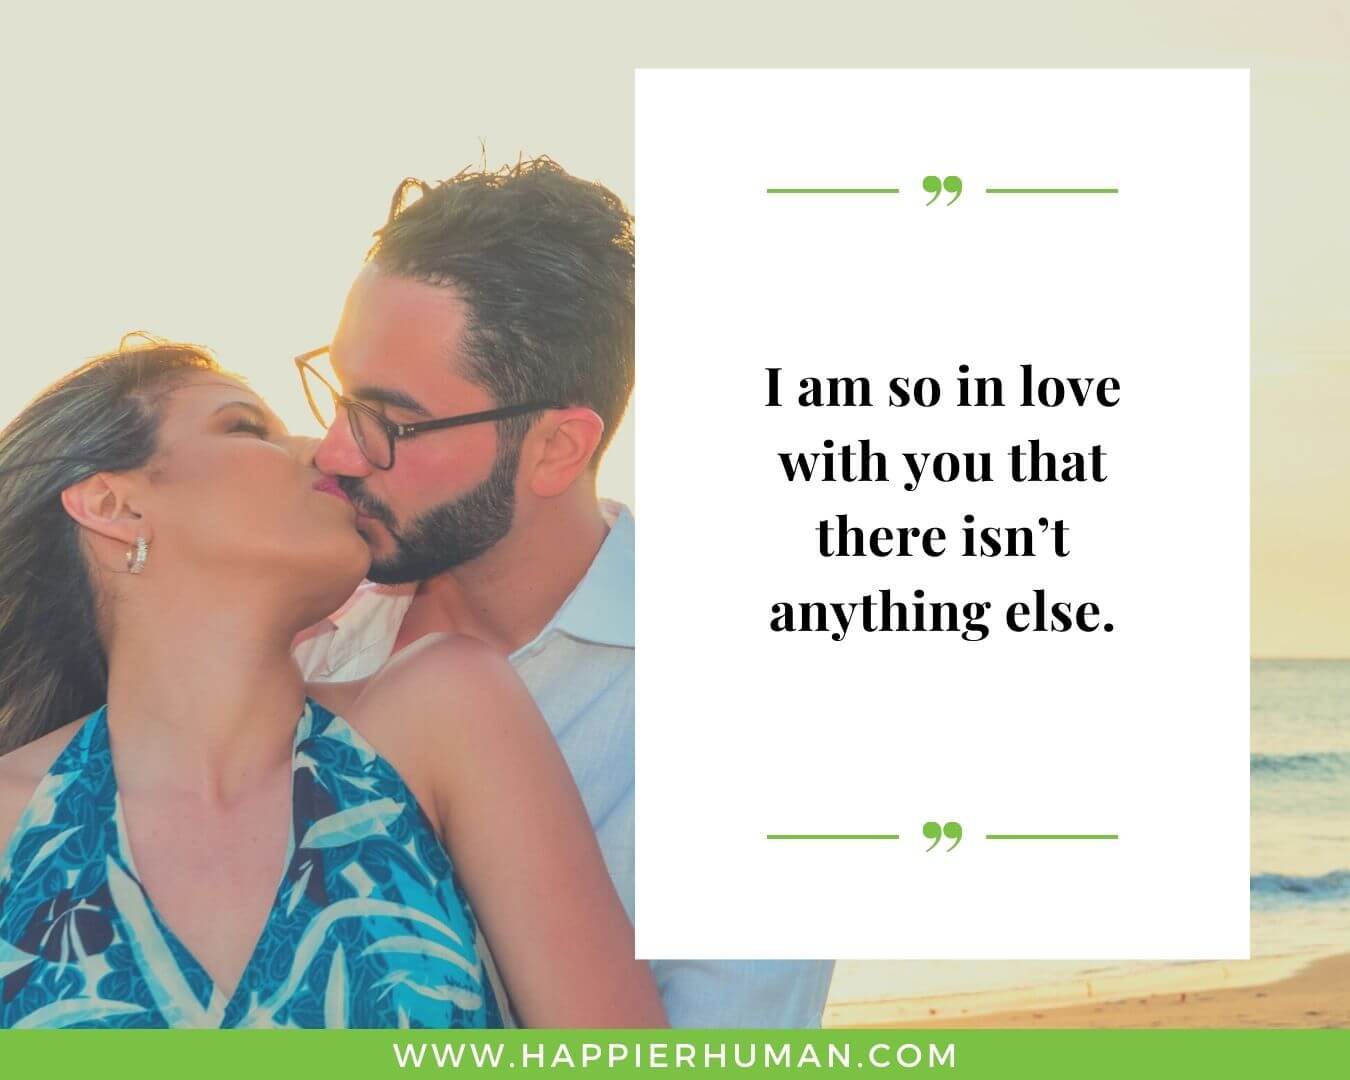 Unconditional Love Quotes for Her - “I am so in love with you that there isn’t anything else.”